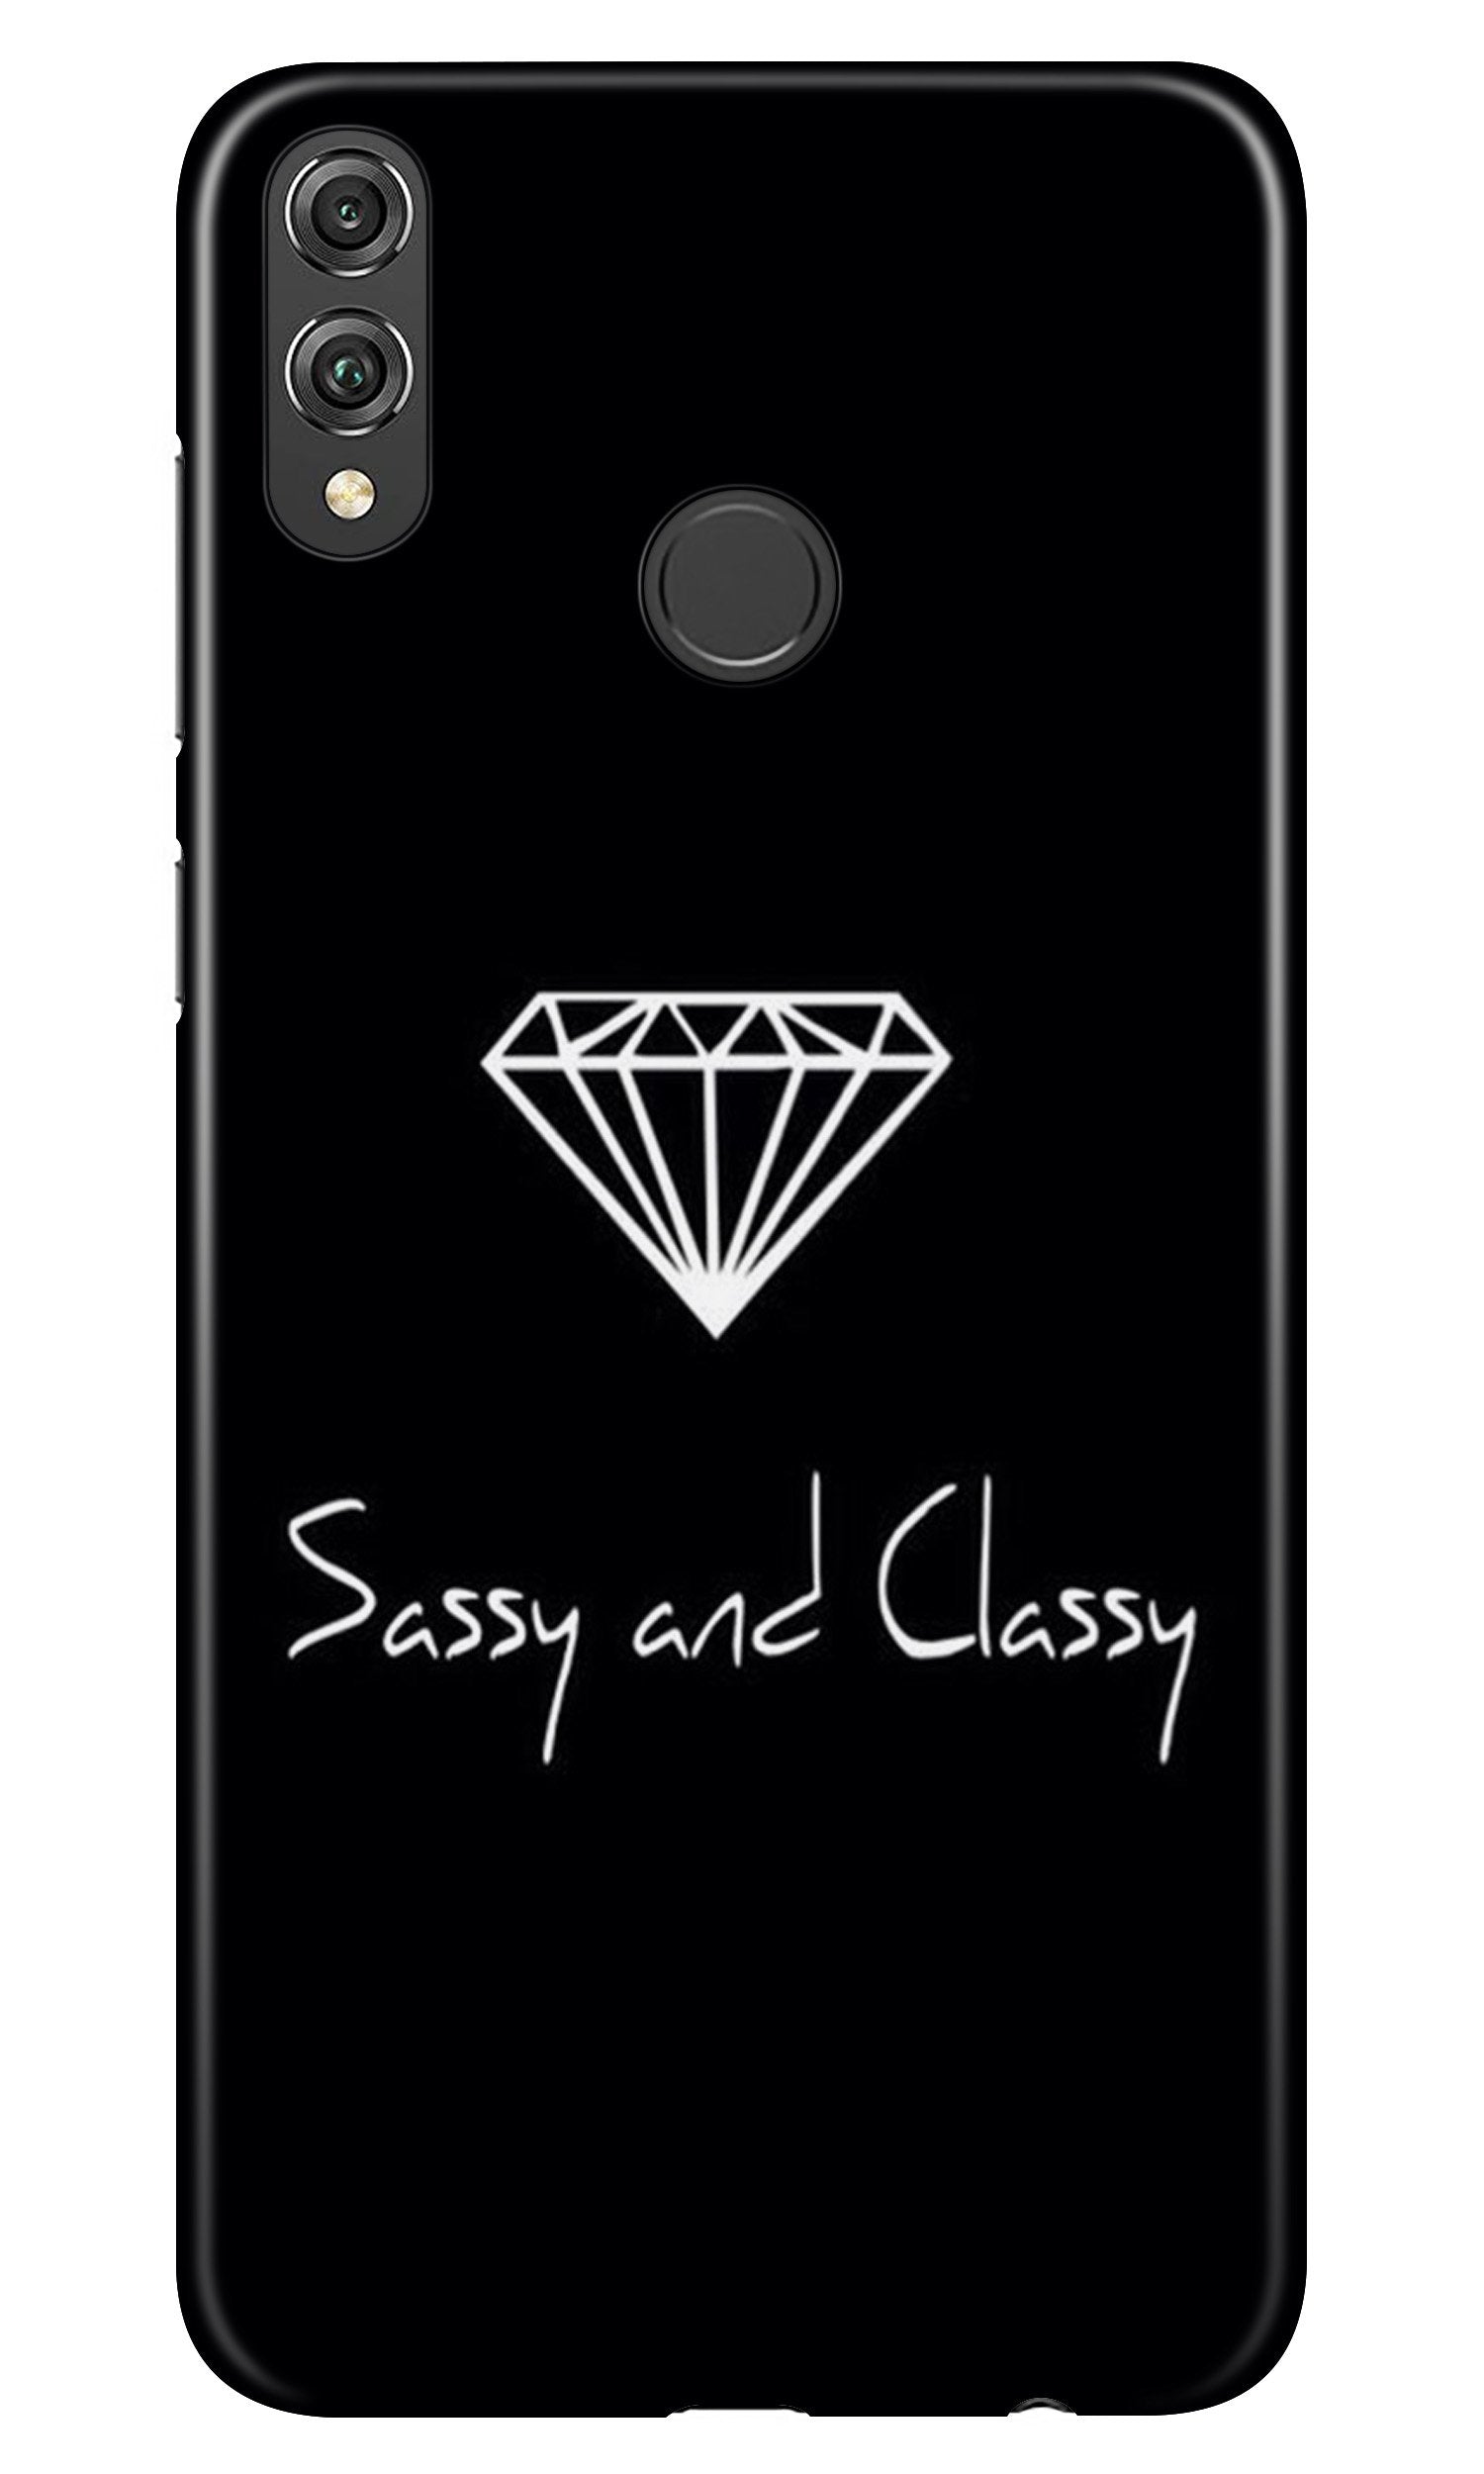 Sassy and Classy Case for Infinix Hot 7 Pro (Design No. 264)